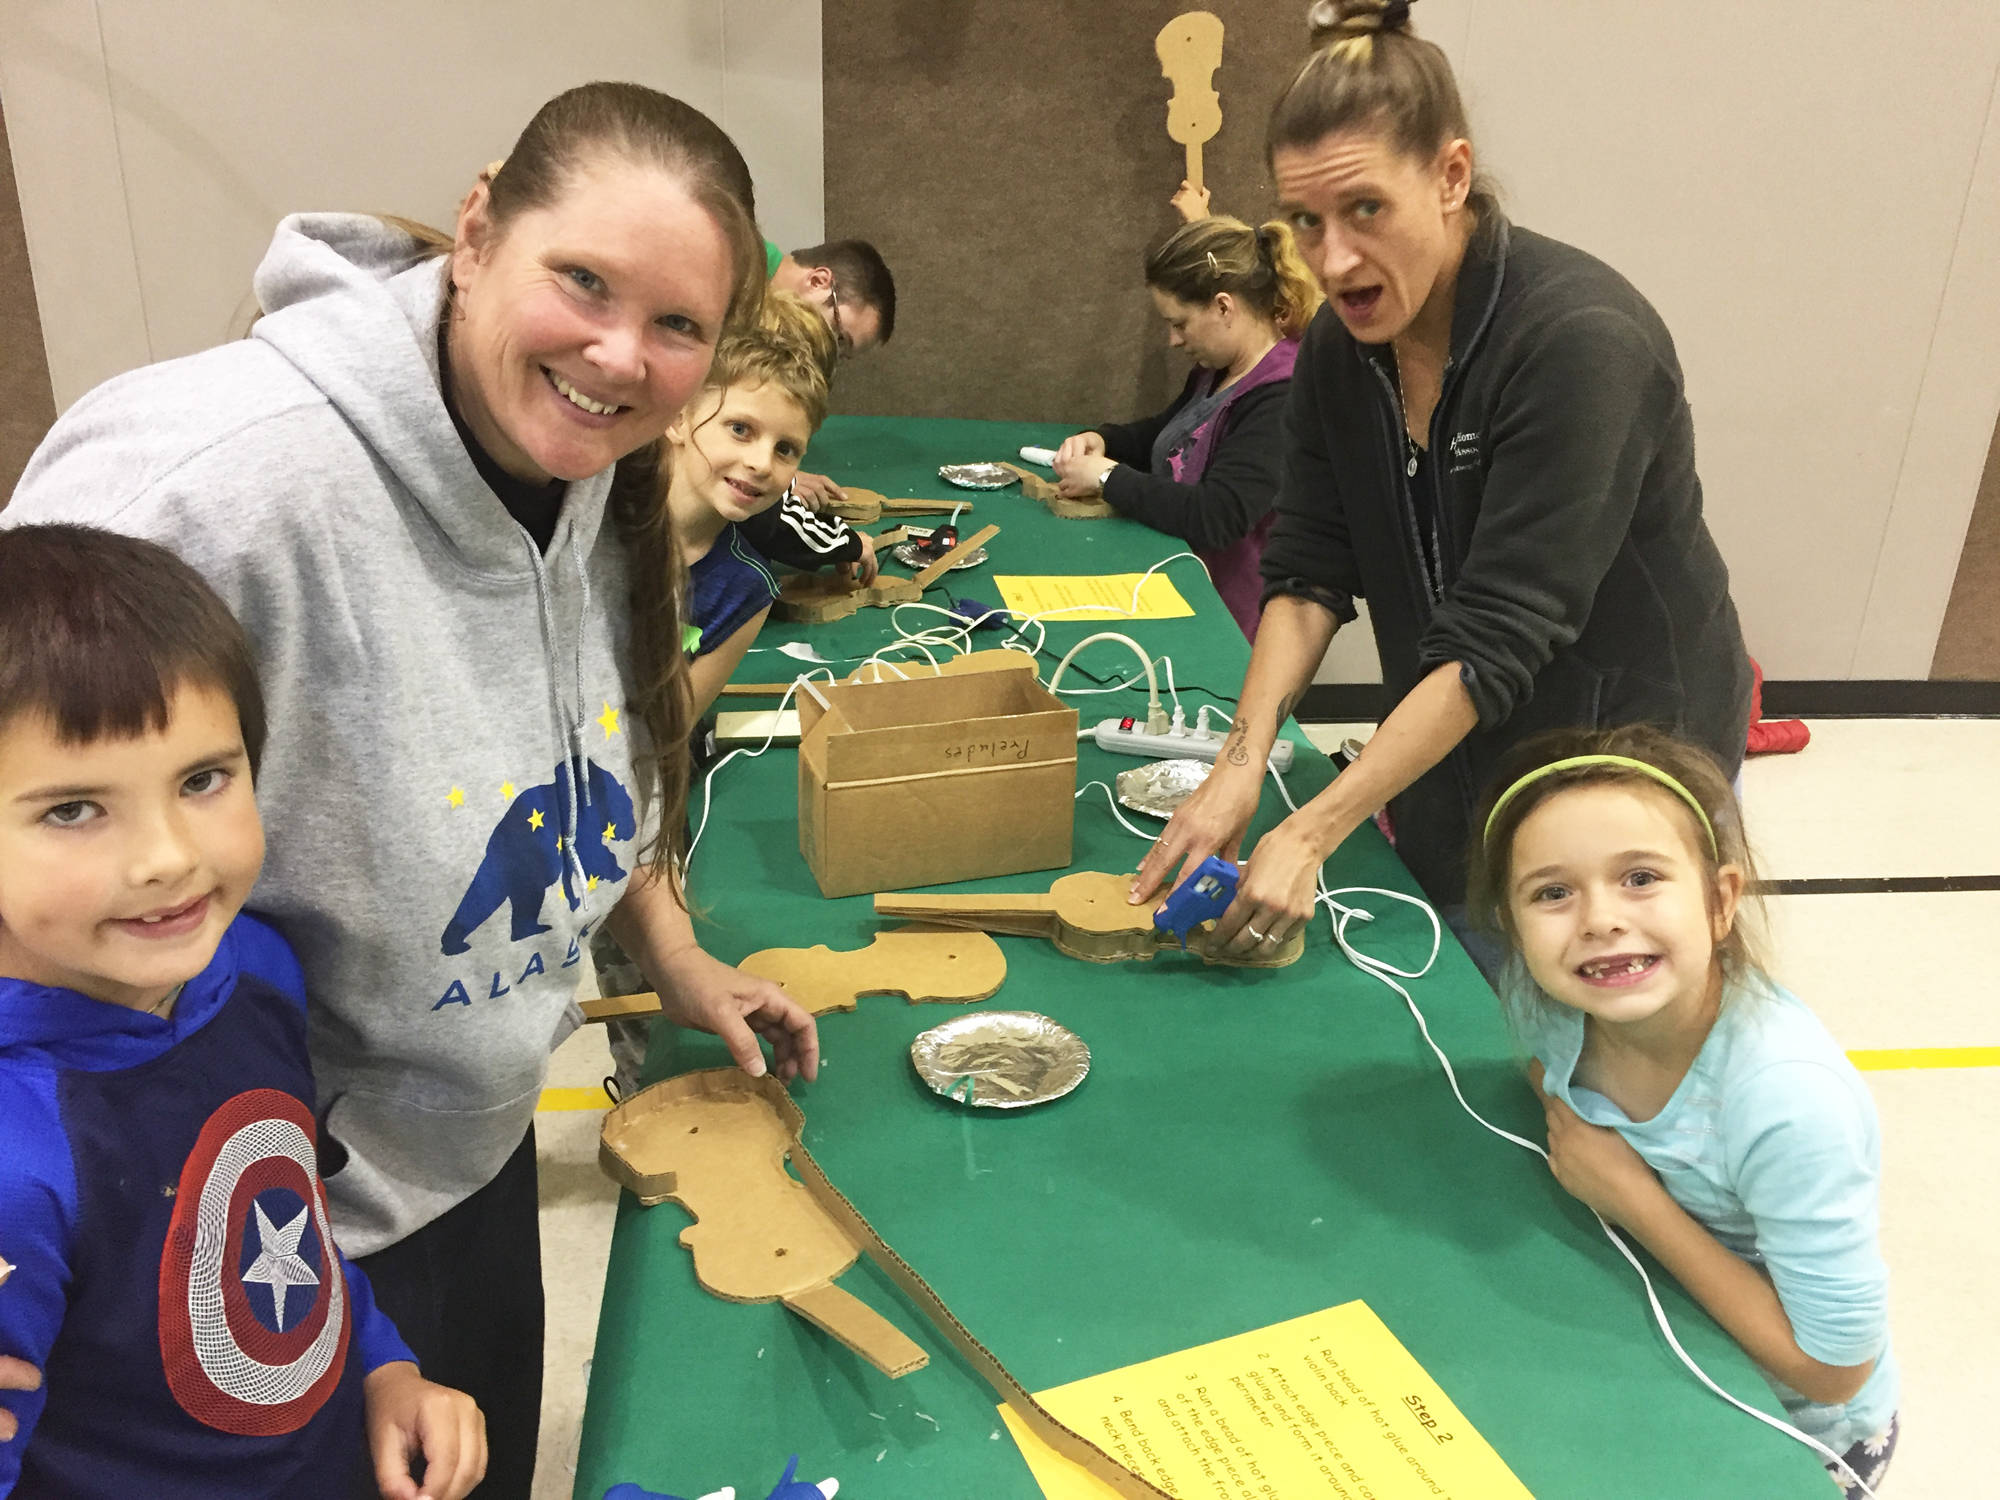 Quintin Stover and his grandmother (left) and Aviana Flyum with her mother (right) create violins out of cardboard Wednesday, Sept. 13, 2017 at Paul Banks Elementary School in Homer, Alaska. (Photo courtesy Wendy Todd)